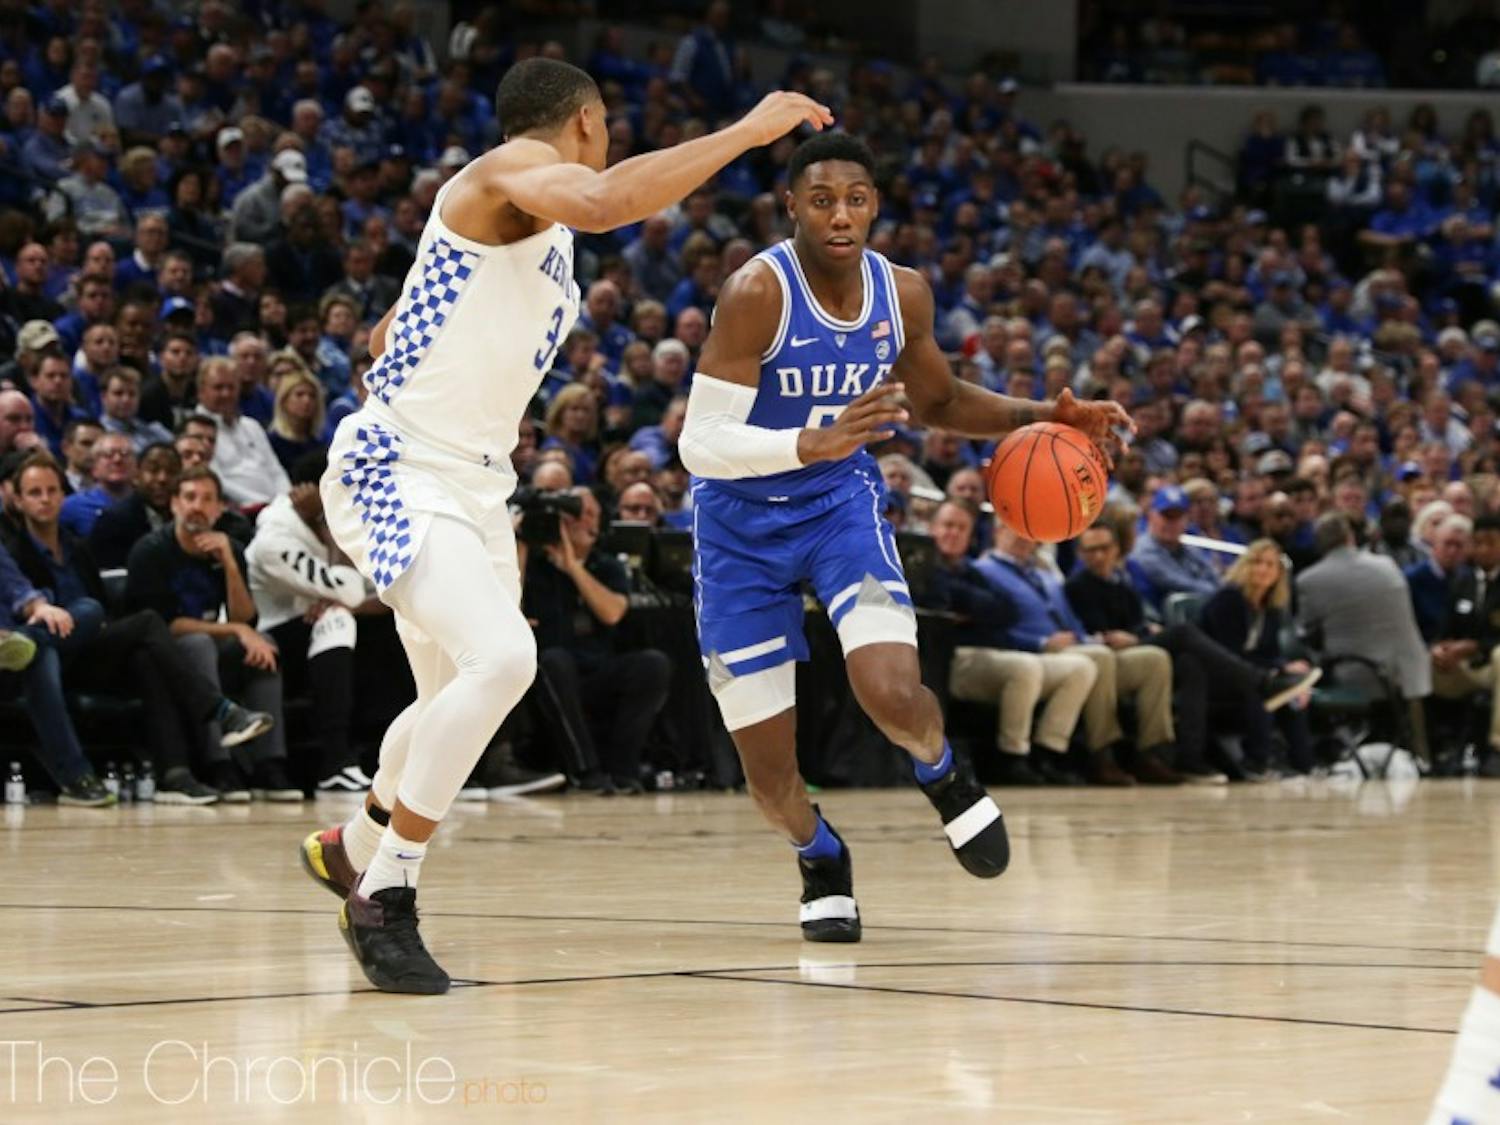 R.J. Barrett will look to build off a 33-point performance in Duke's home opener Sunday.